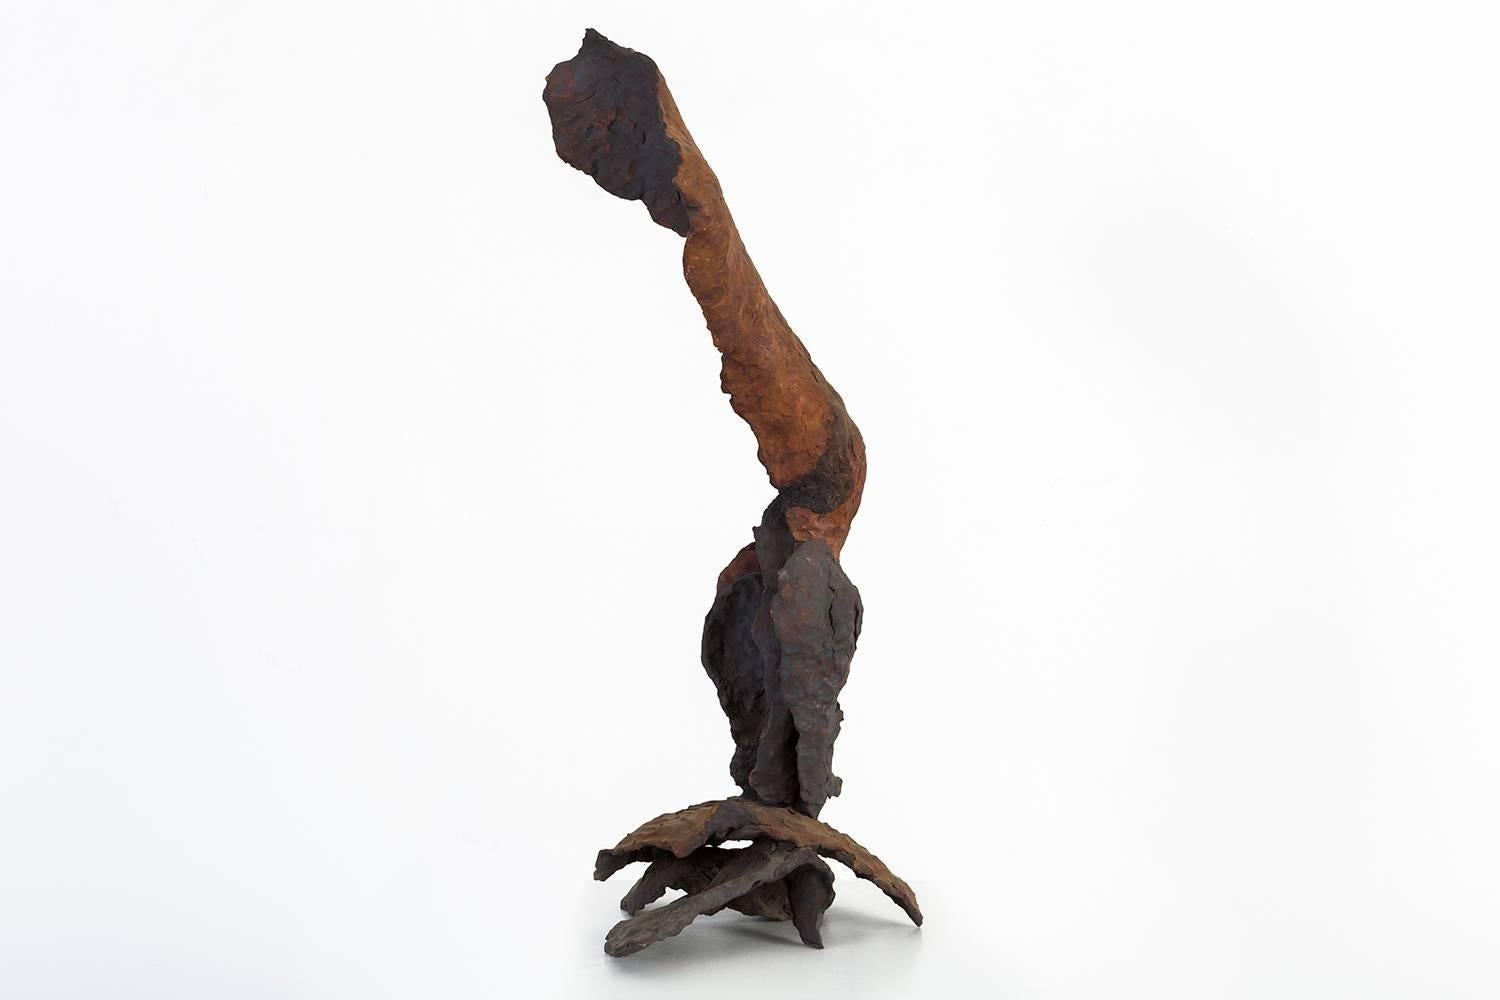 A beautifully sculpted stoneware leg takes a firm, yet feminine stance in Ruth Aizuss Migdal’s “Standing Tall”. Different tones and texture of the medium contribute to the complexity and depth of this piece.

Through a puzzle-like assembly of